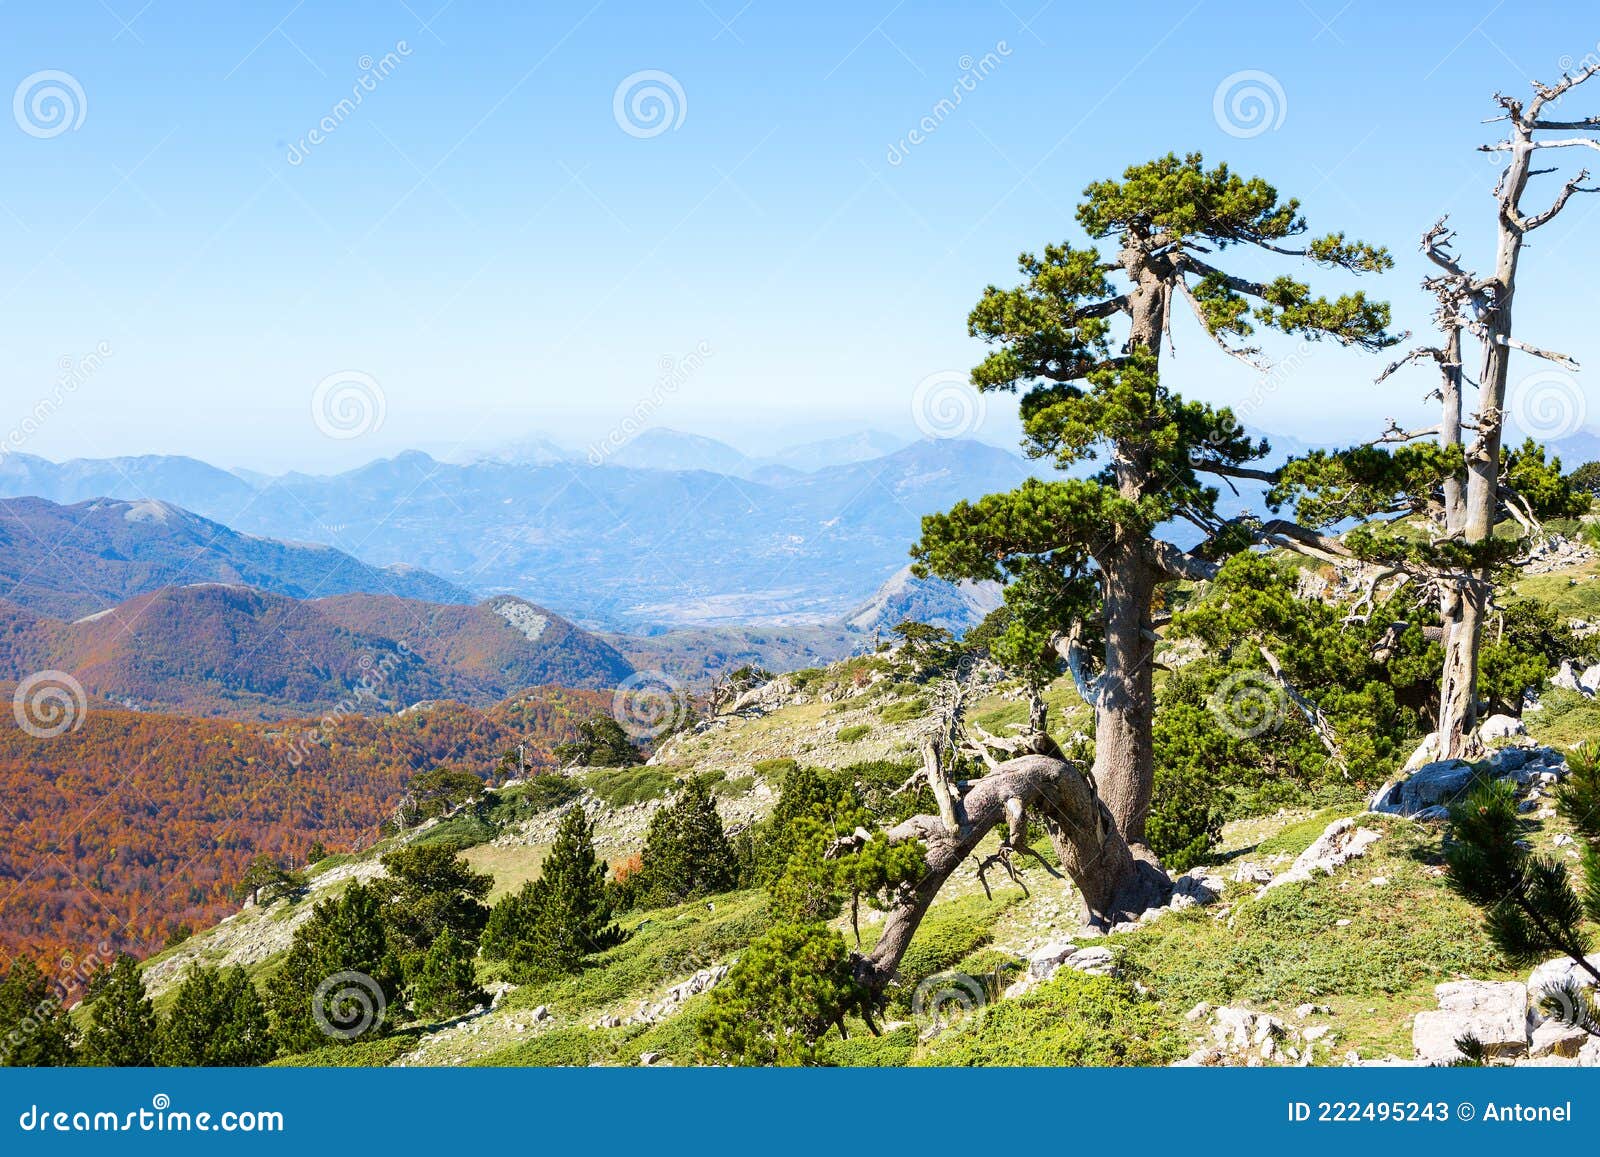 view from serra di crispo, pollino national park,  southern apennine mountains, italy